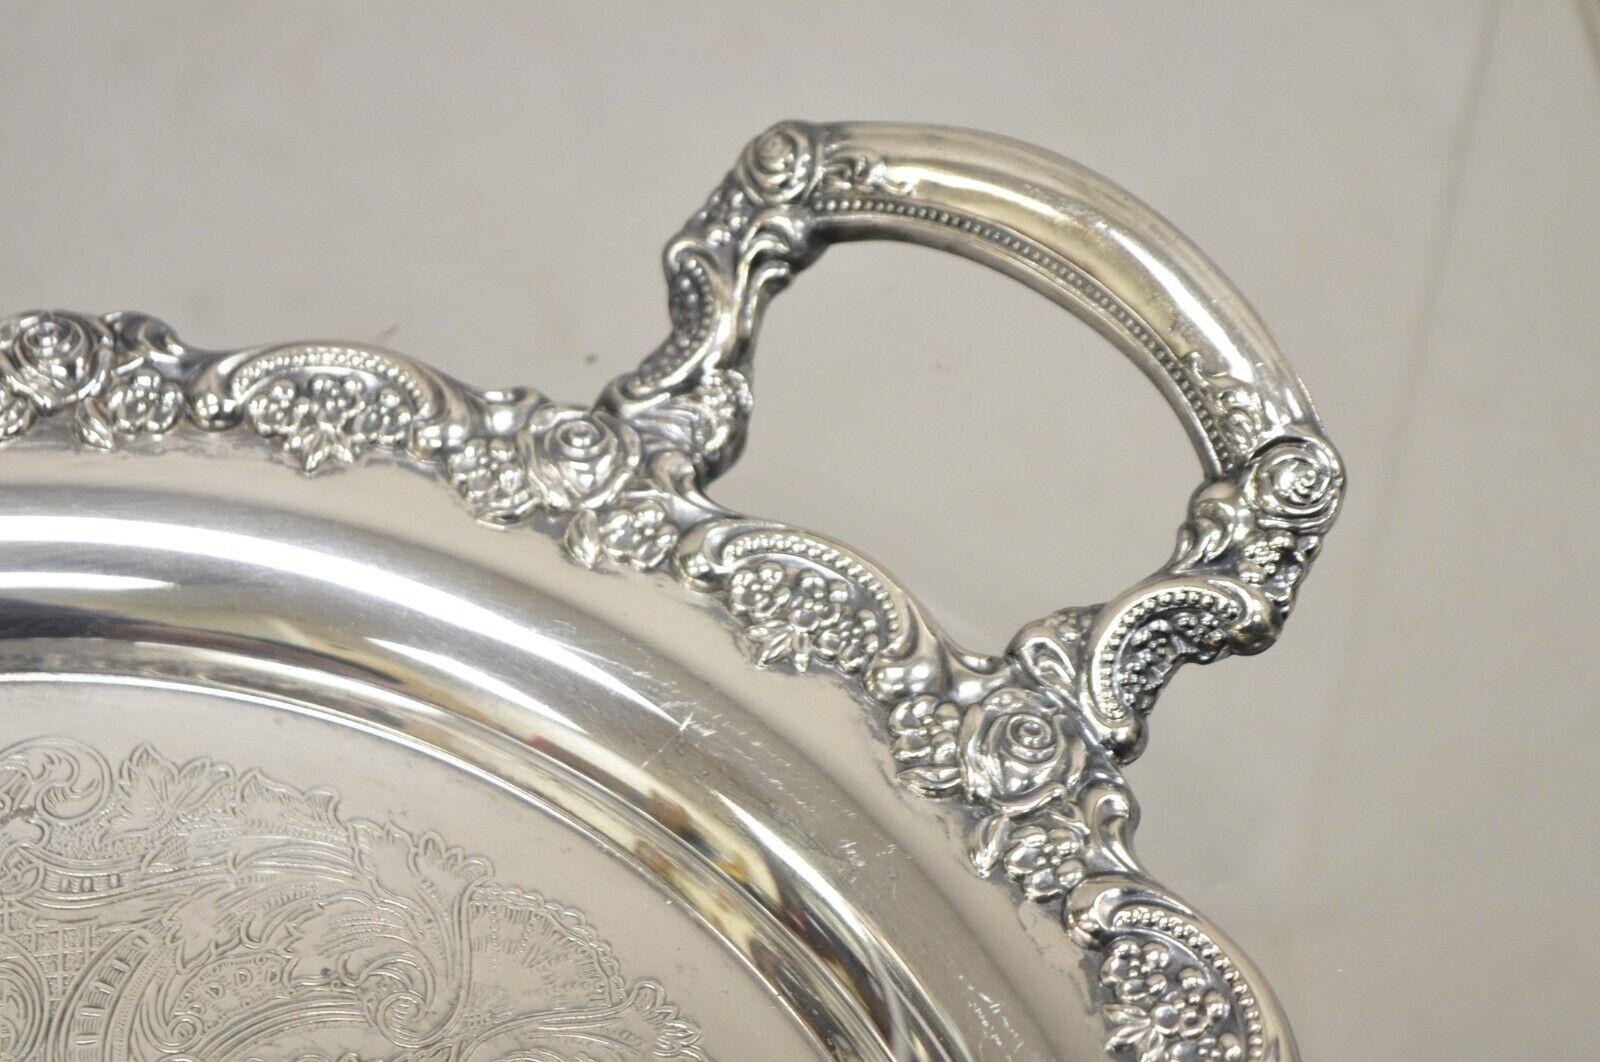 Vtg Oneida Victorian Style Round Silver Plated Serving Platter Tray w handles For Sale 2